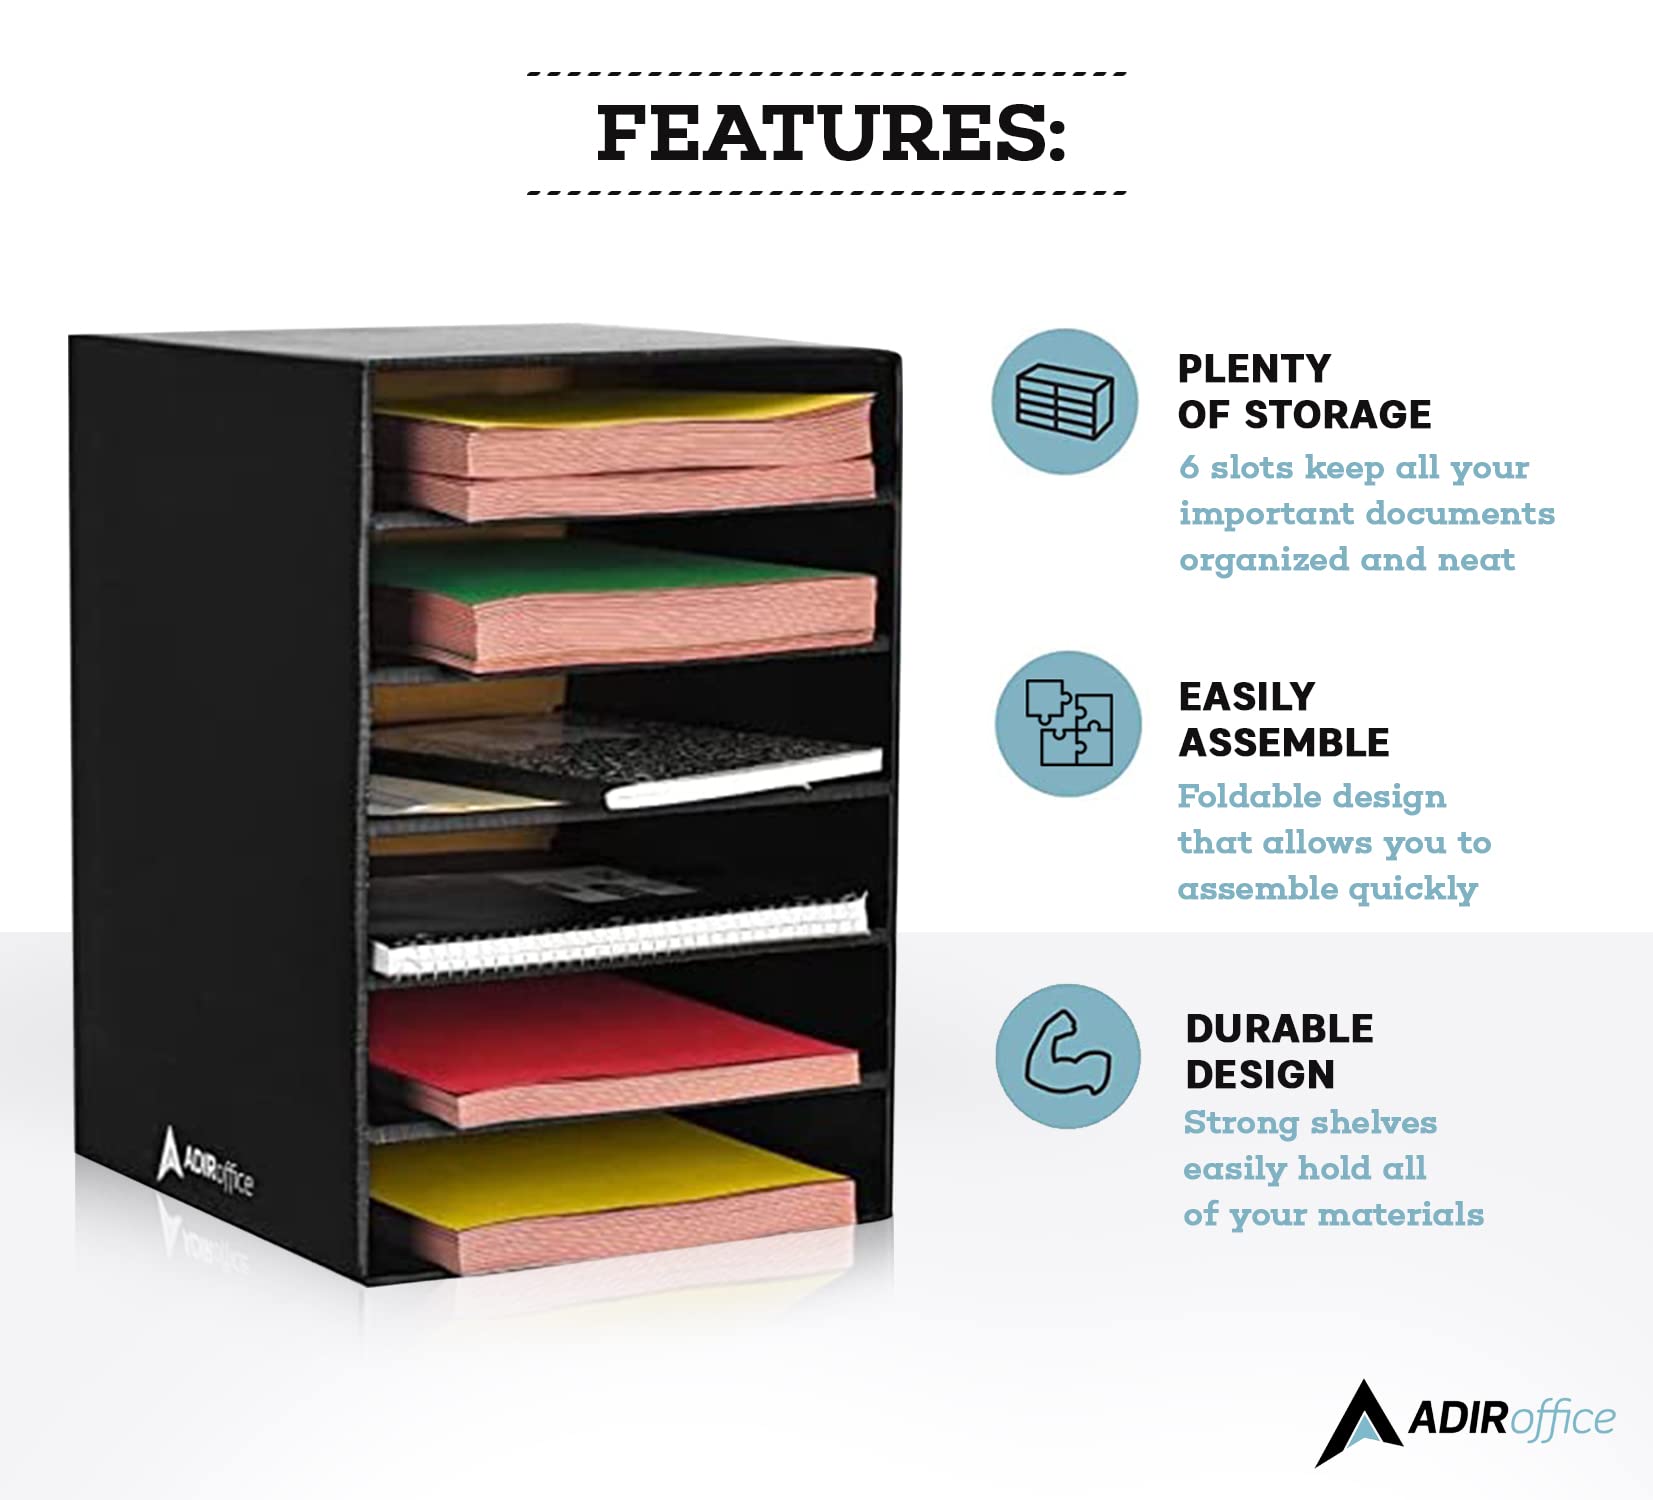 AdirOffice Paper Storage Organizer 6 Slot Cardboard Construction Paper Shelf Organizer for Home, School, Classroom, or Office Multifunctional Storage for Documents, Mails, Books, Files, and More  - Like New